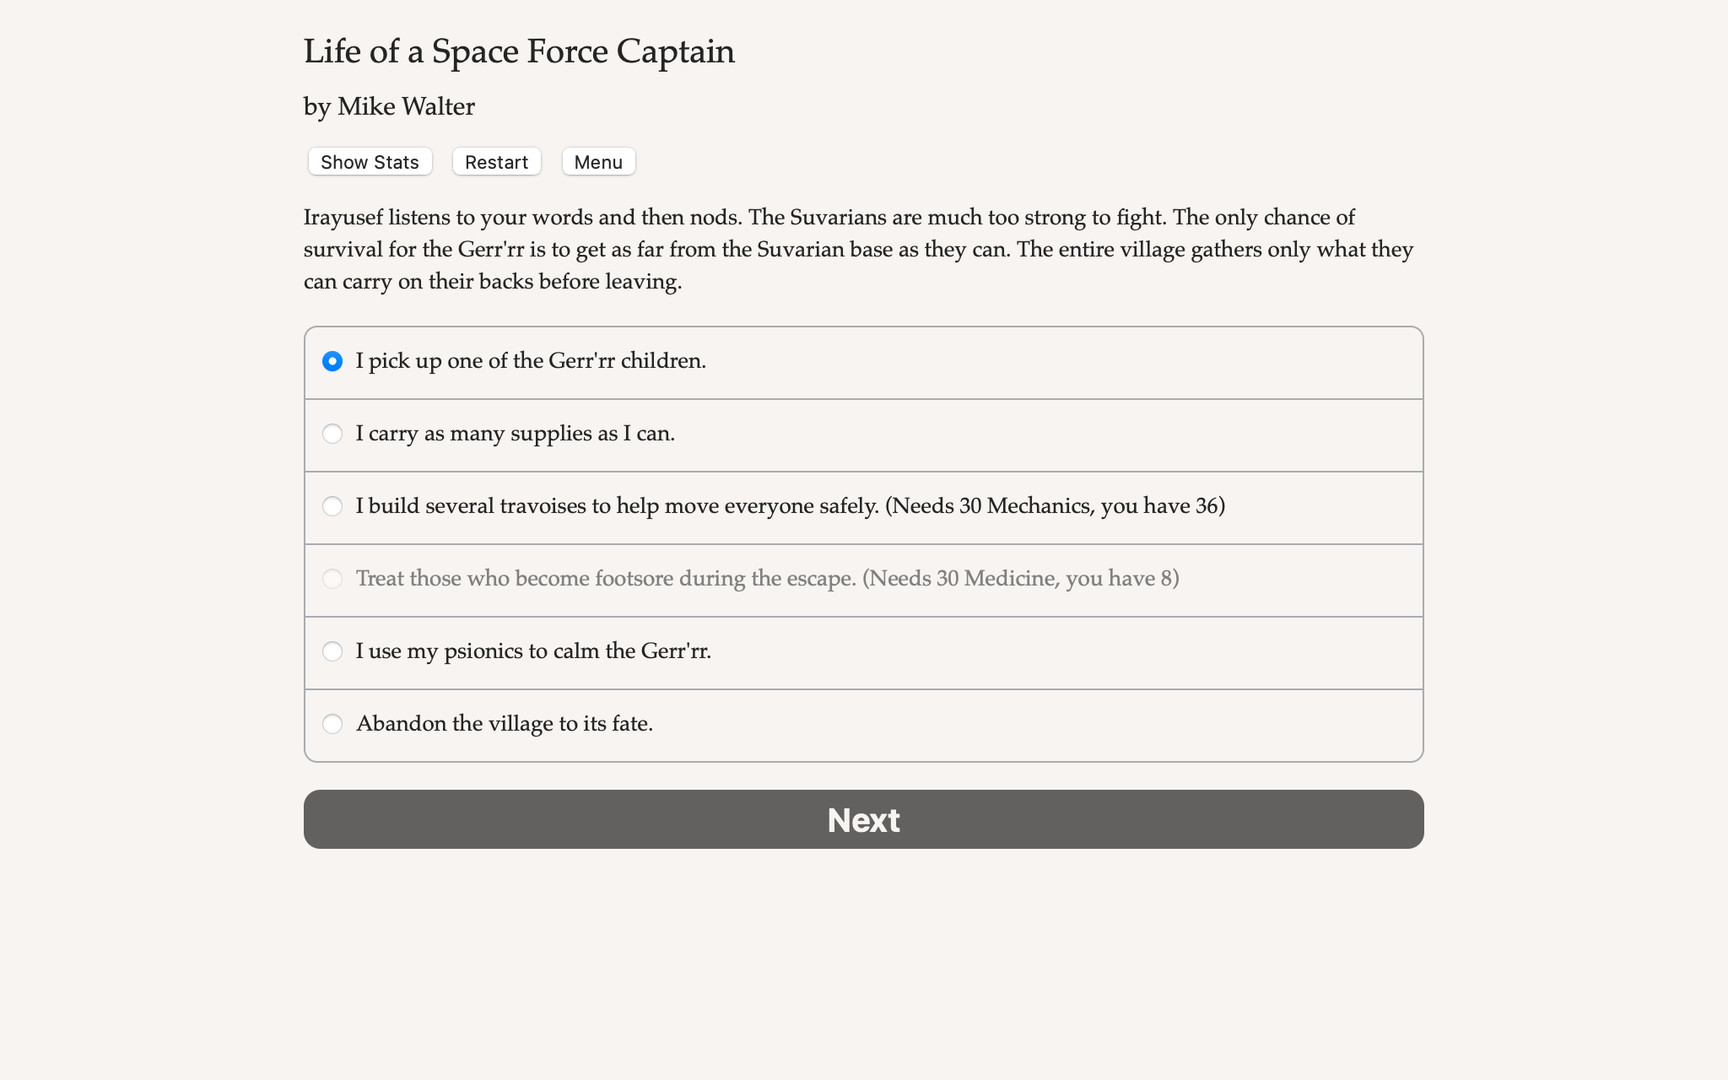 Life of a Space Force Captain Demo Featured Screenshot #1